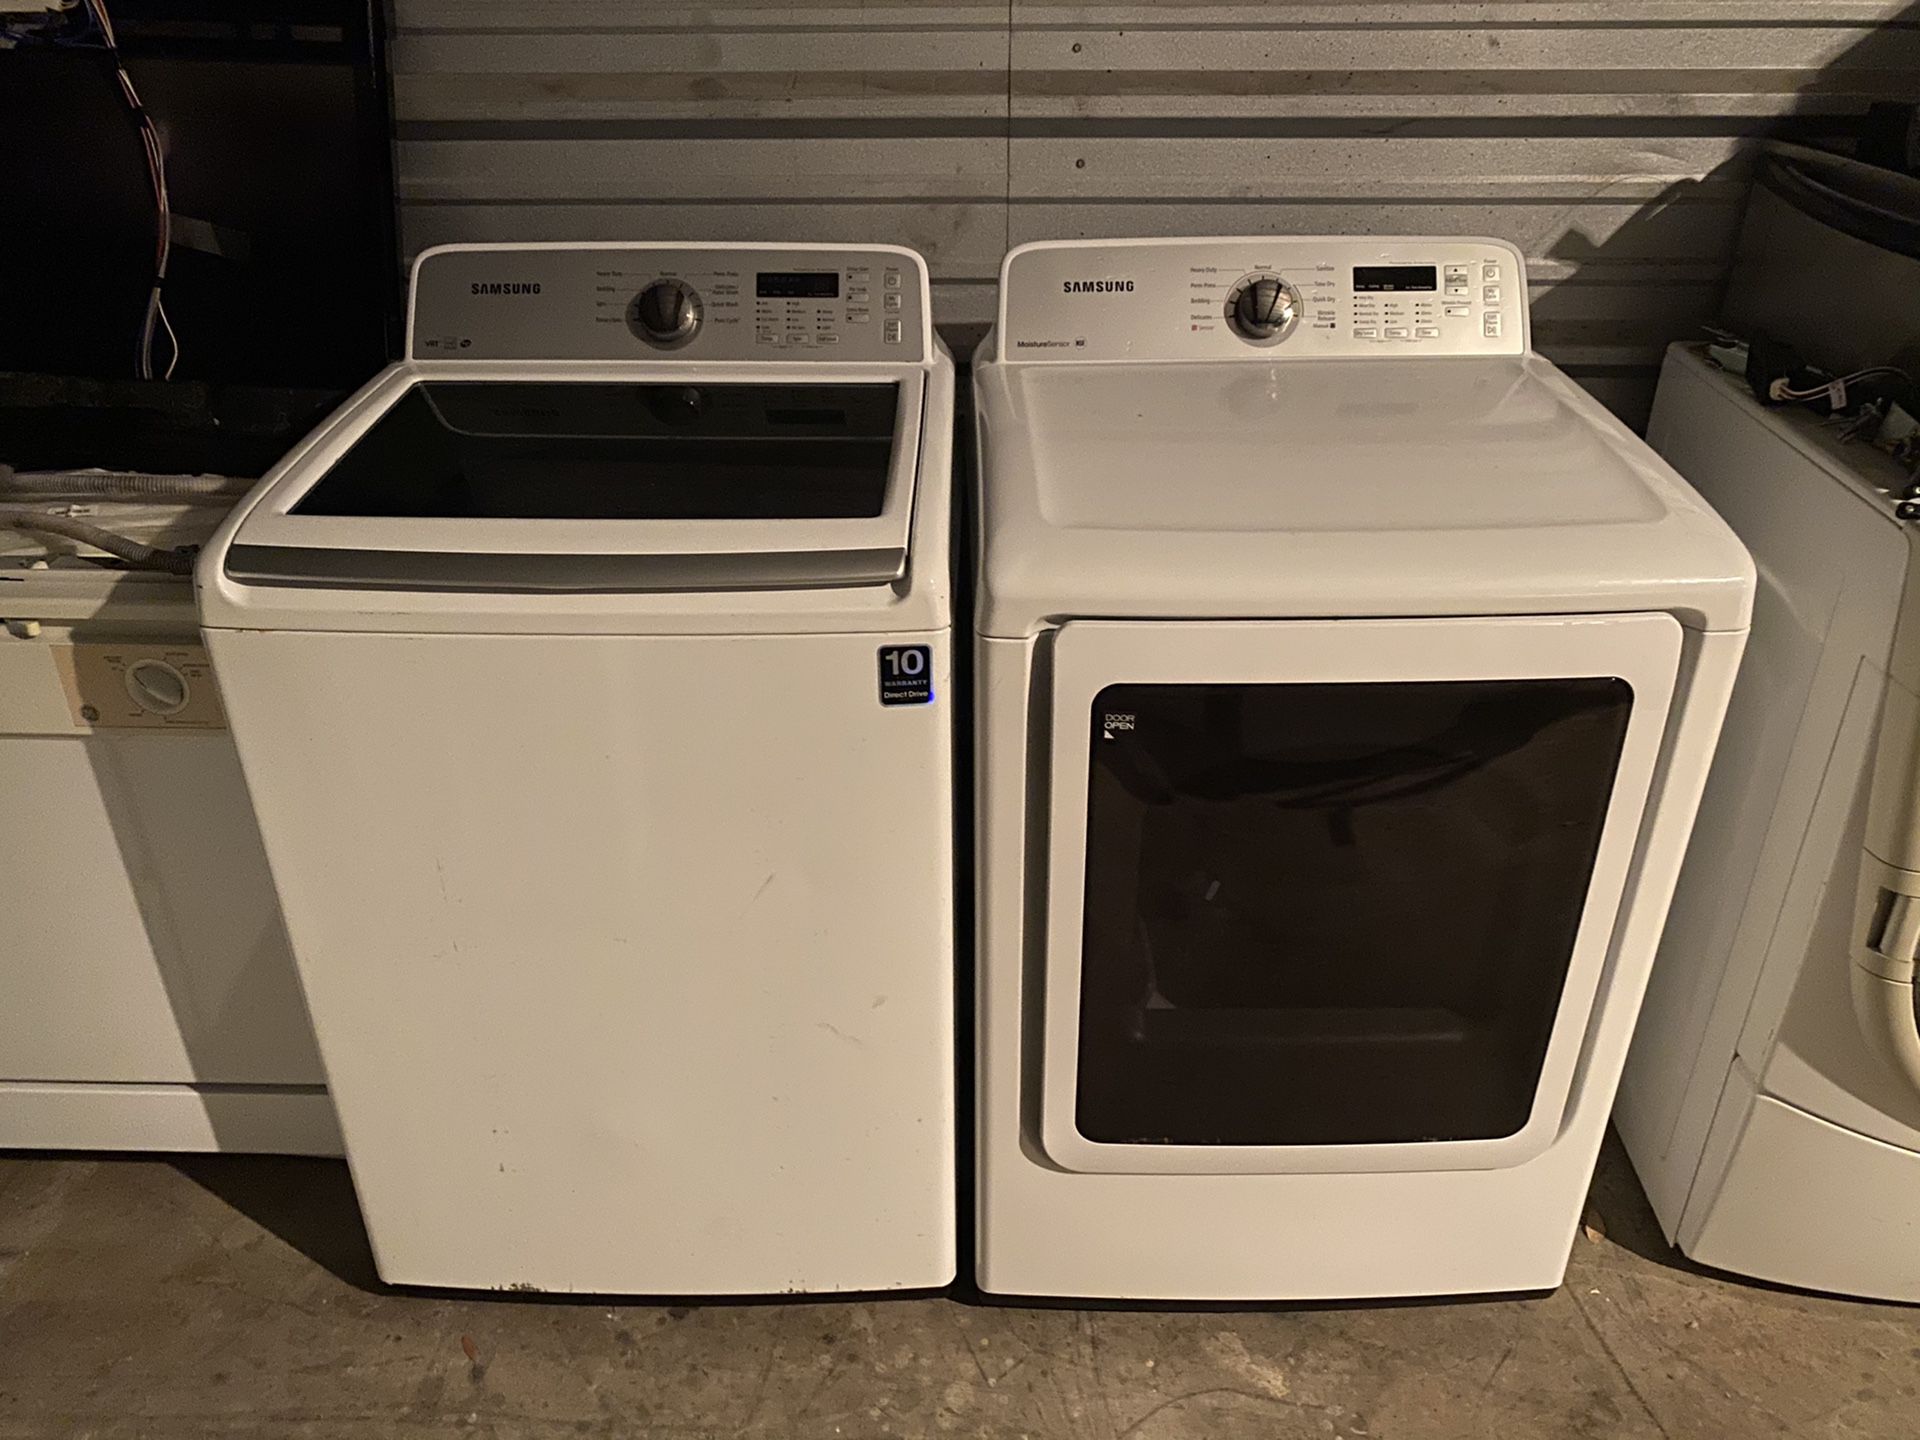 Samsung high-efficiency washer and dryer set( free delivery)